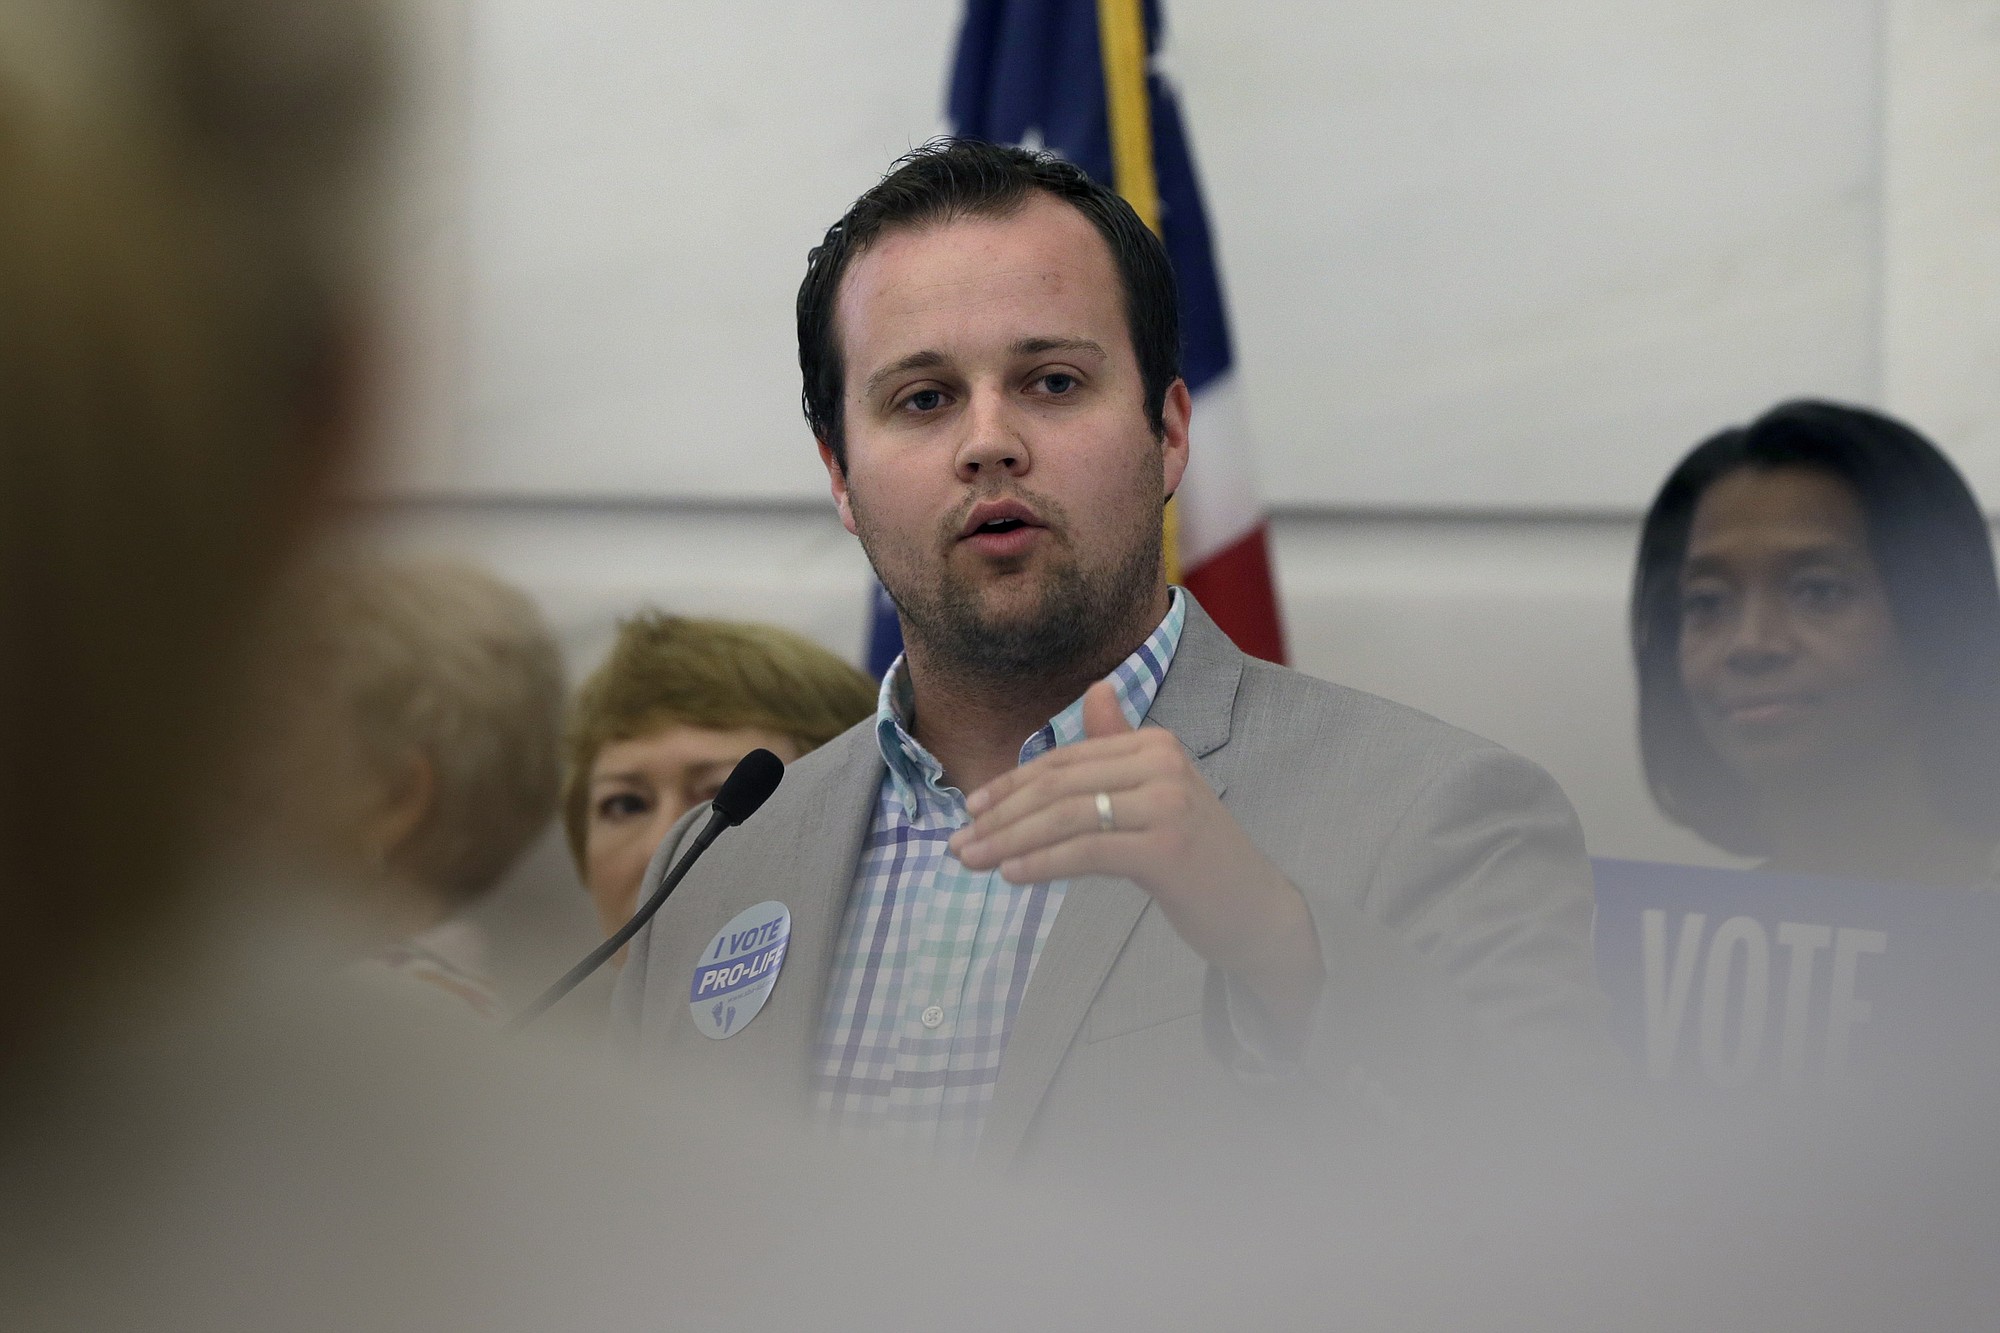 Josh Duggar, executive director of FRC Action, speaks Aug. 29, 2014, in favor the Pain-Capable Unborn Child Protection Act at the Arkansas state Capitol in Little Rock, Ark. Tony Perkins, president of the Washington-based Christian lobbying group, said Thursday, May 21, 2015, that he has accepted the resignation of Duggar in the wake of the reality TV star's apology for unspecified bad behavior as a young teen.